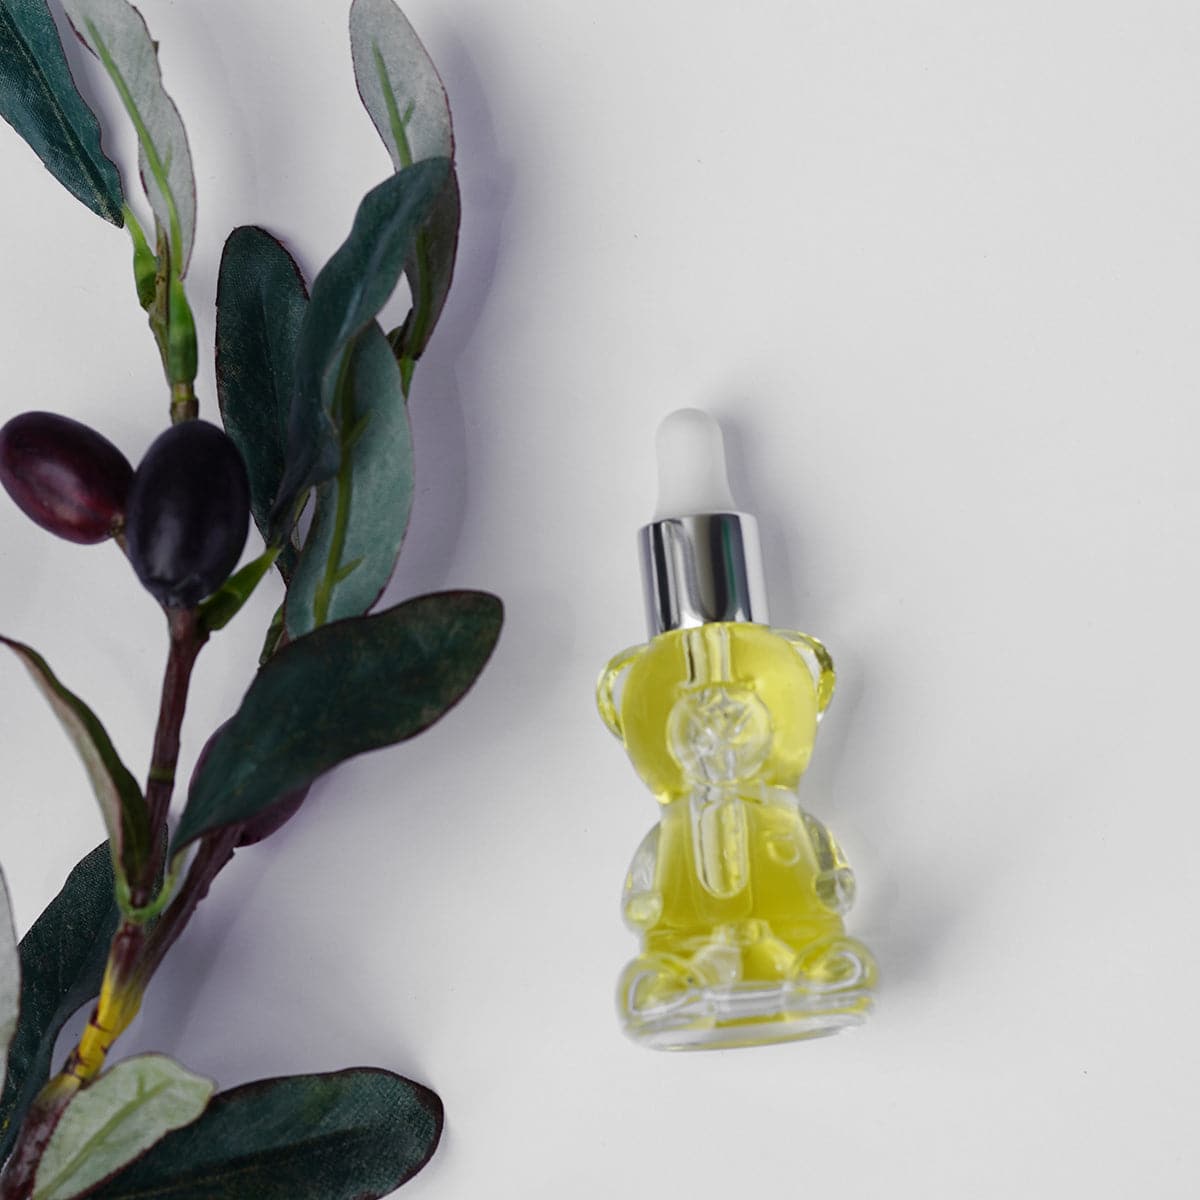 a clean image of the IN YOUR FACE NOURISHING OIL - BEAR EDITION on a greyish background. The oil is in a clear Bear-shaped bottle with a squeezable dropper inside. The oil is a beautiful clear golden color. It's next to an olive branch.